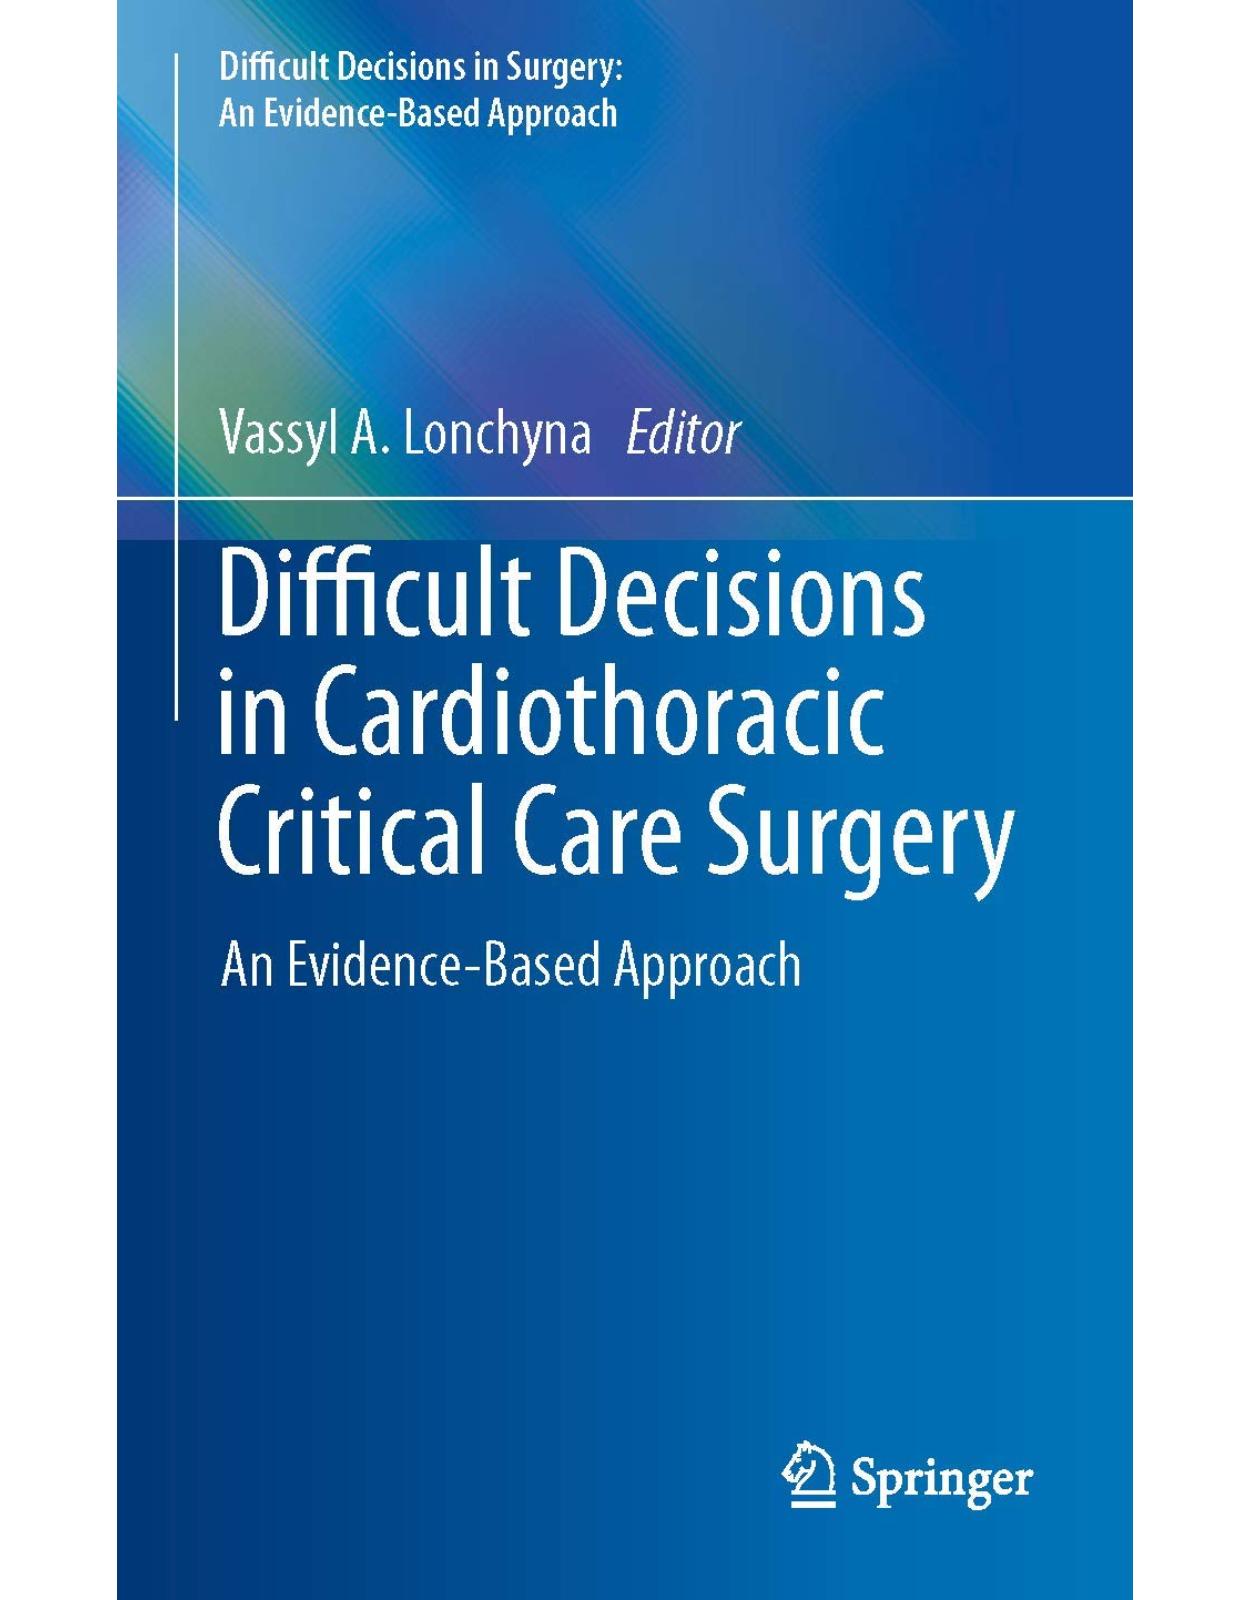 Difficult Decisions in Cardiothoracic Critical Care Surgery: An Evidence-Based Approach (Difficult Decisions in Surgery: An Evidence-Based Approach)